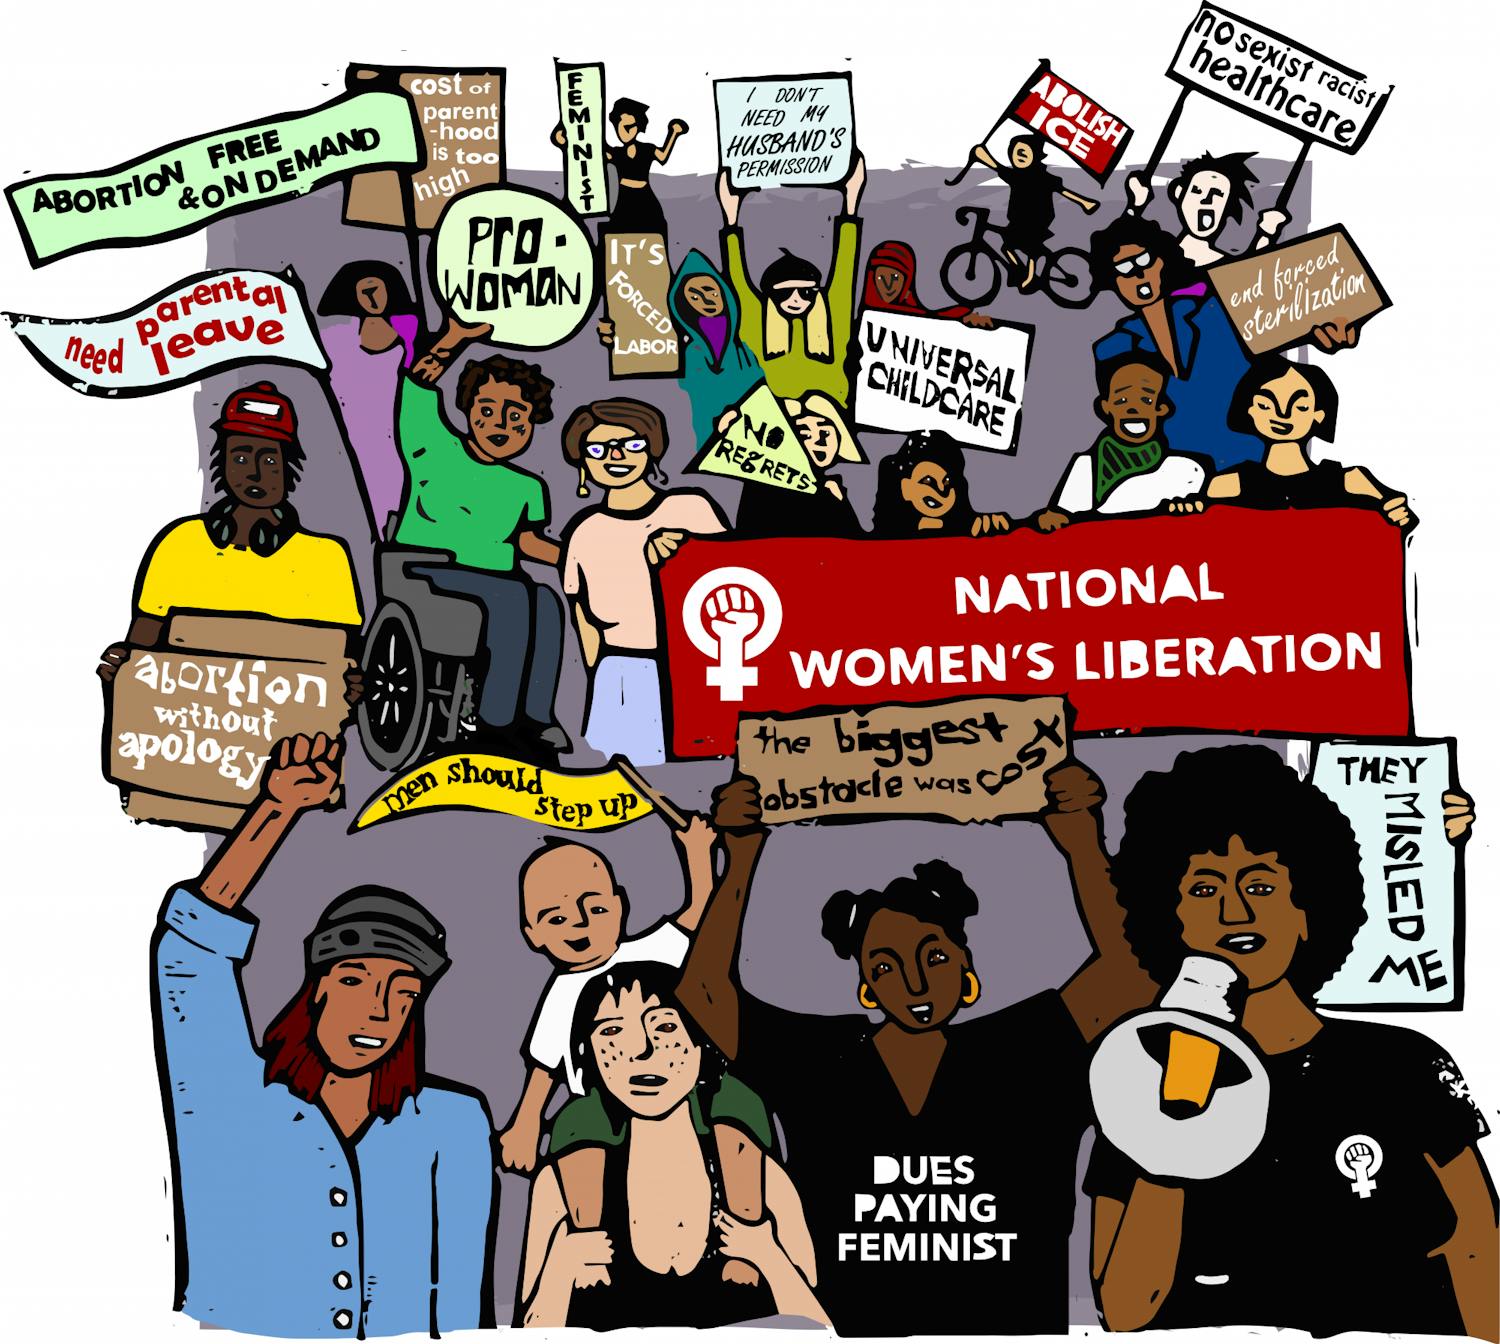 “Gainesville has a really proud, awesome history as the first place to have an organized feminist group in the South,” NWL organizer Brooke Eliazar-Macke said.
